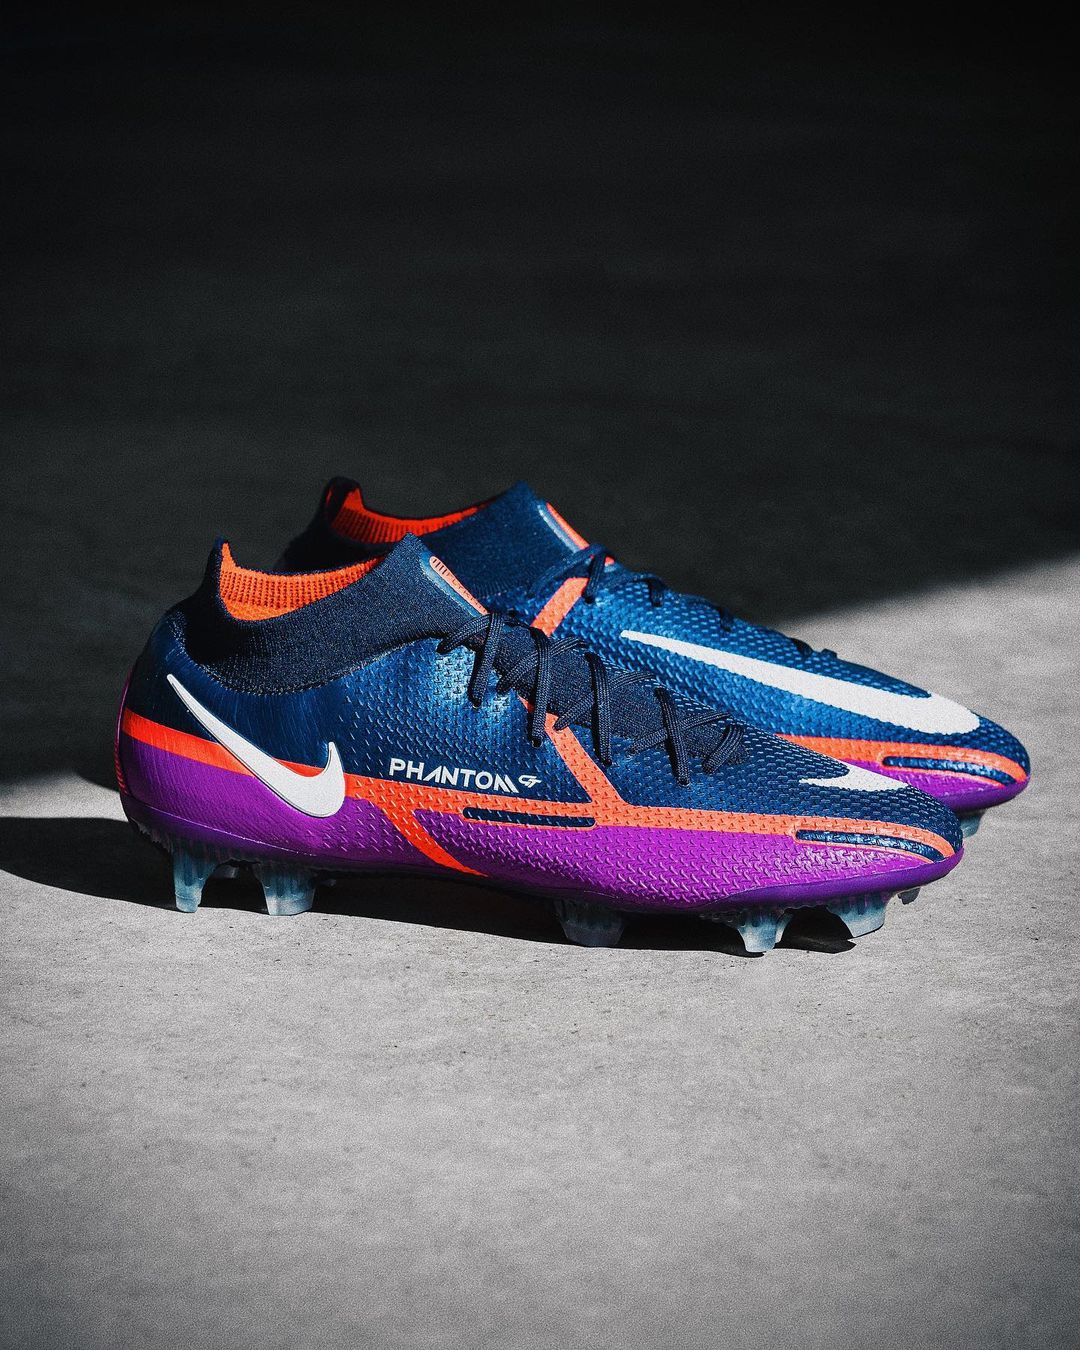 Havn Papua Ny Guinea Fundament Pro:Direct Soccer US on Twitter: "Show your next-gen skills with the new  Nike Phantom GT II UV 🔥 Available now at Pro:Direct Soccer US 📲 Shop here  🛒 https://t.co/r6Of5hbnfQ https://t.co/wnqzIbM3Jw" / Twitter